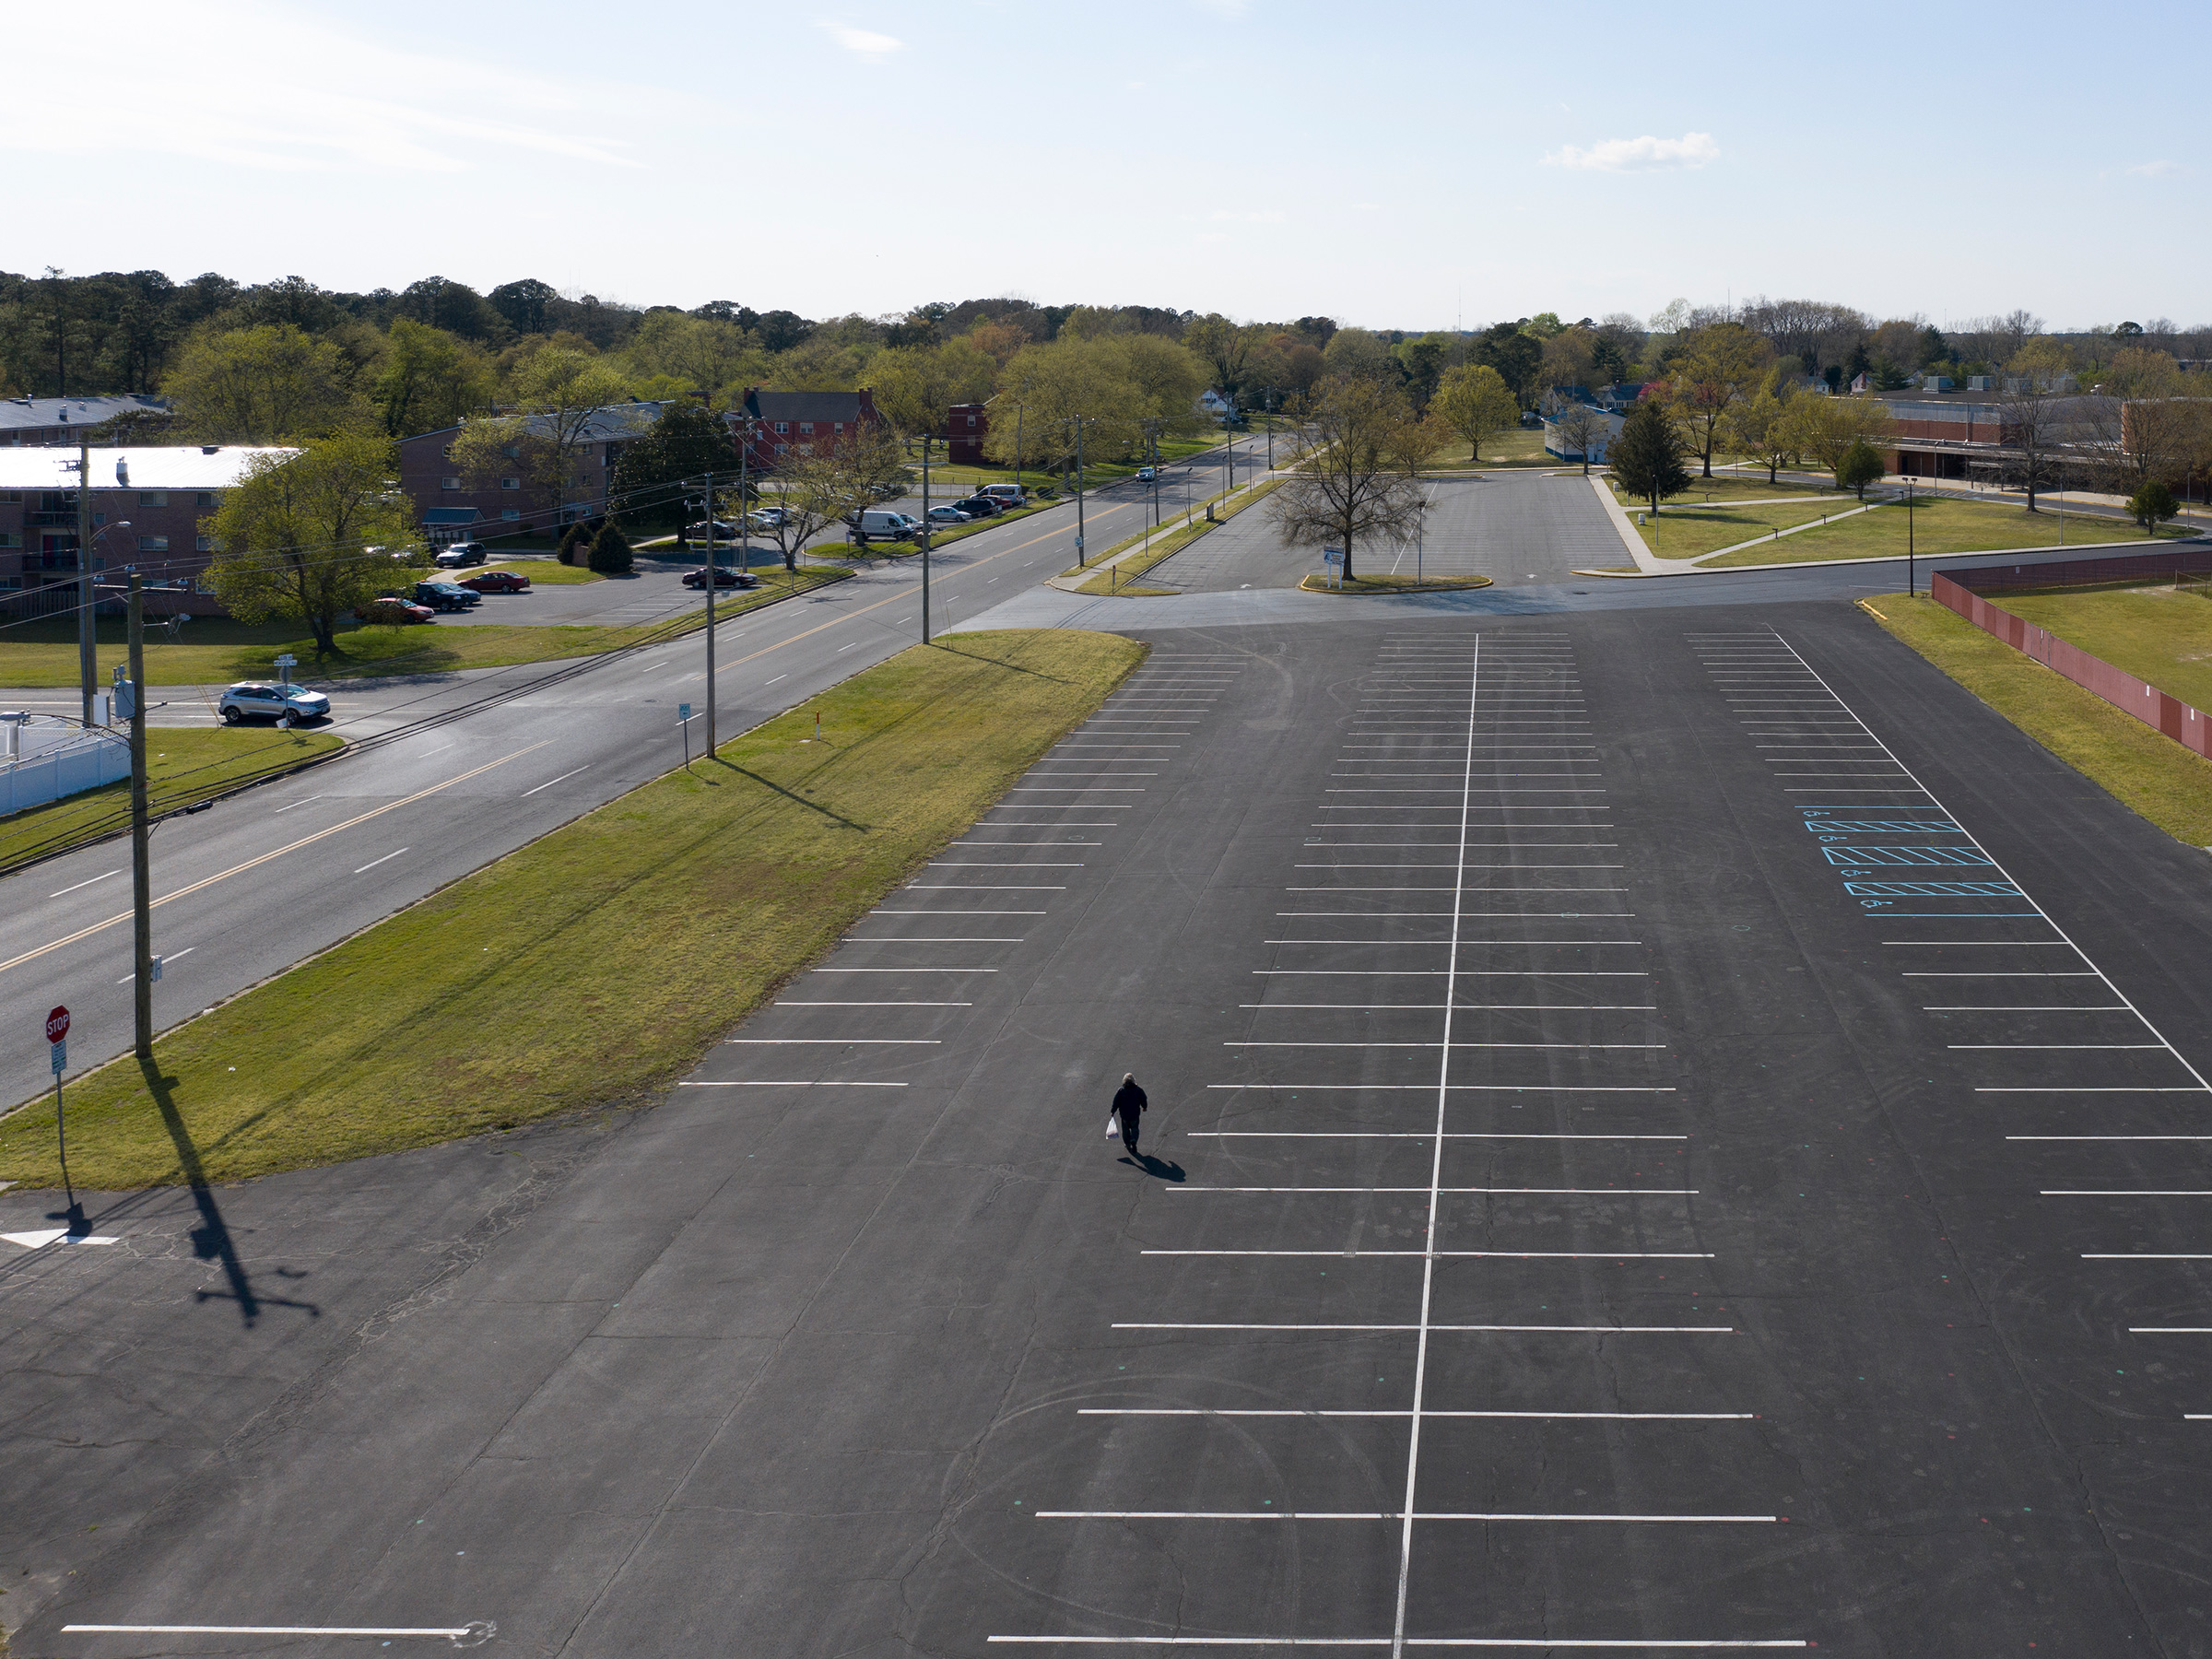 <strong>Salisbury, Md., April 11, 2020.</strong> A man walks through the parking lot of the Wicomico County Stadium. "Before the pandemic, there was no reason to notice an empty parking lot. Now, besides the supermarket and Wal-Mart, every parking lot is empty." (Peter van Agtmael—Magnum Photos for TIME)